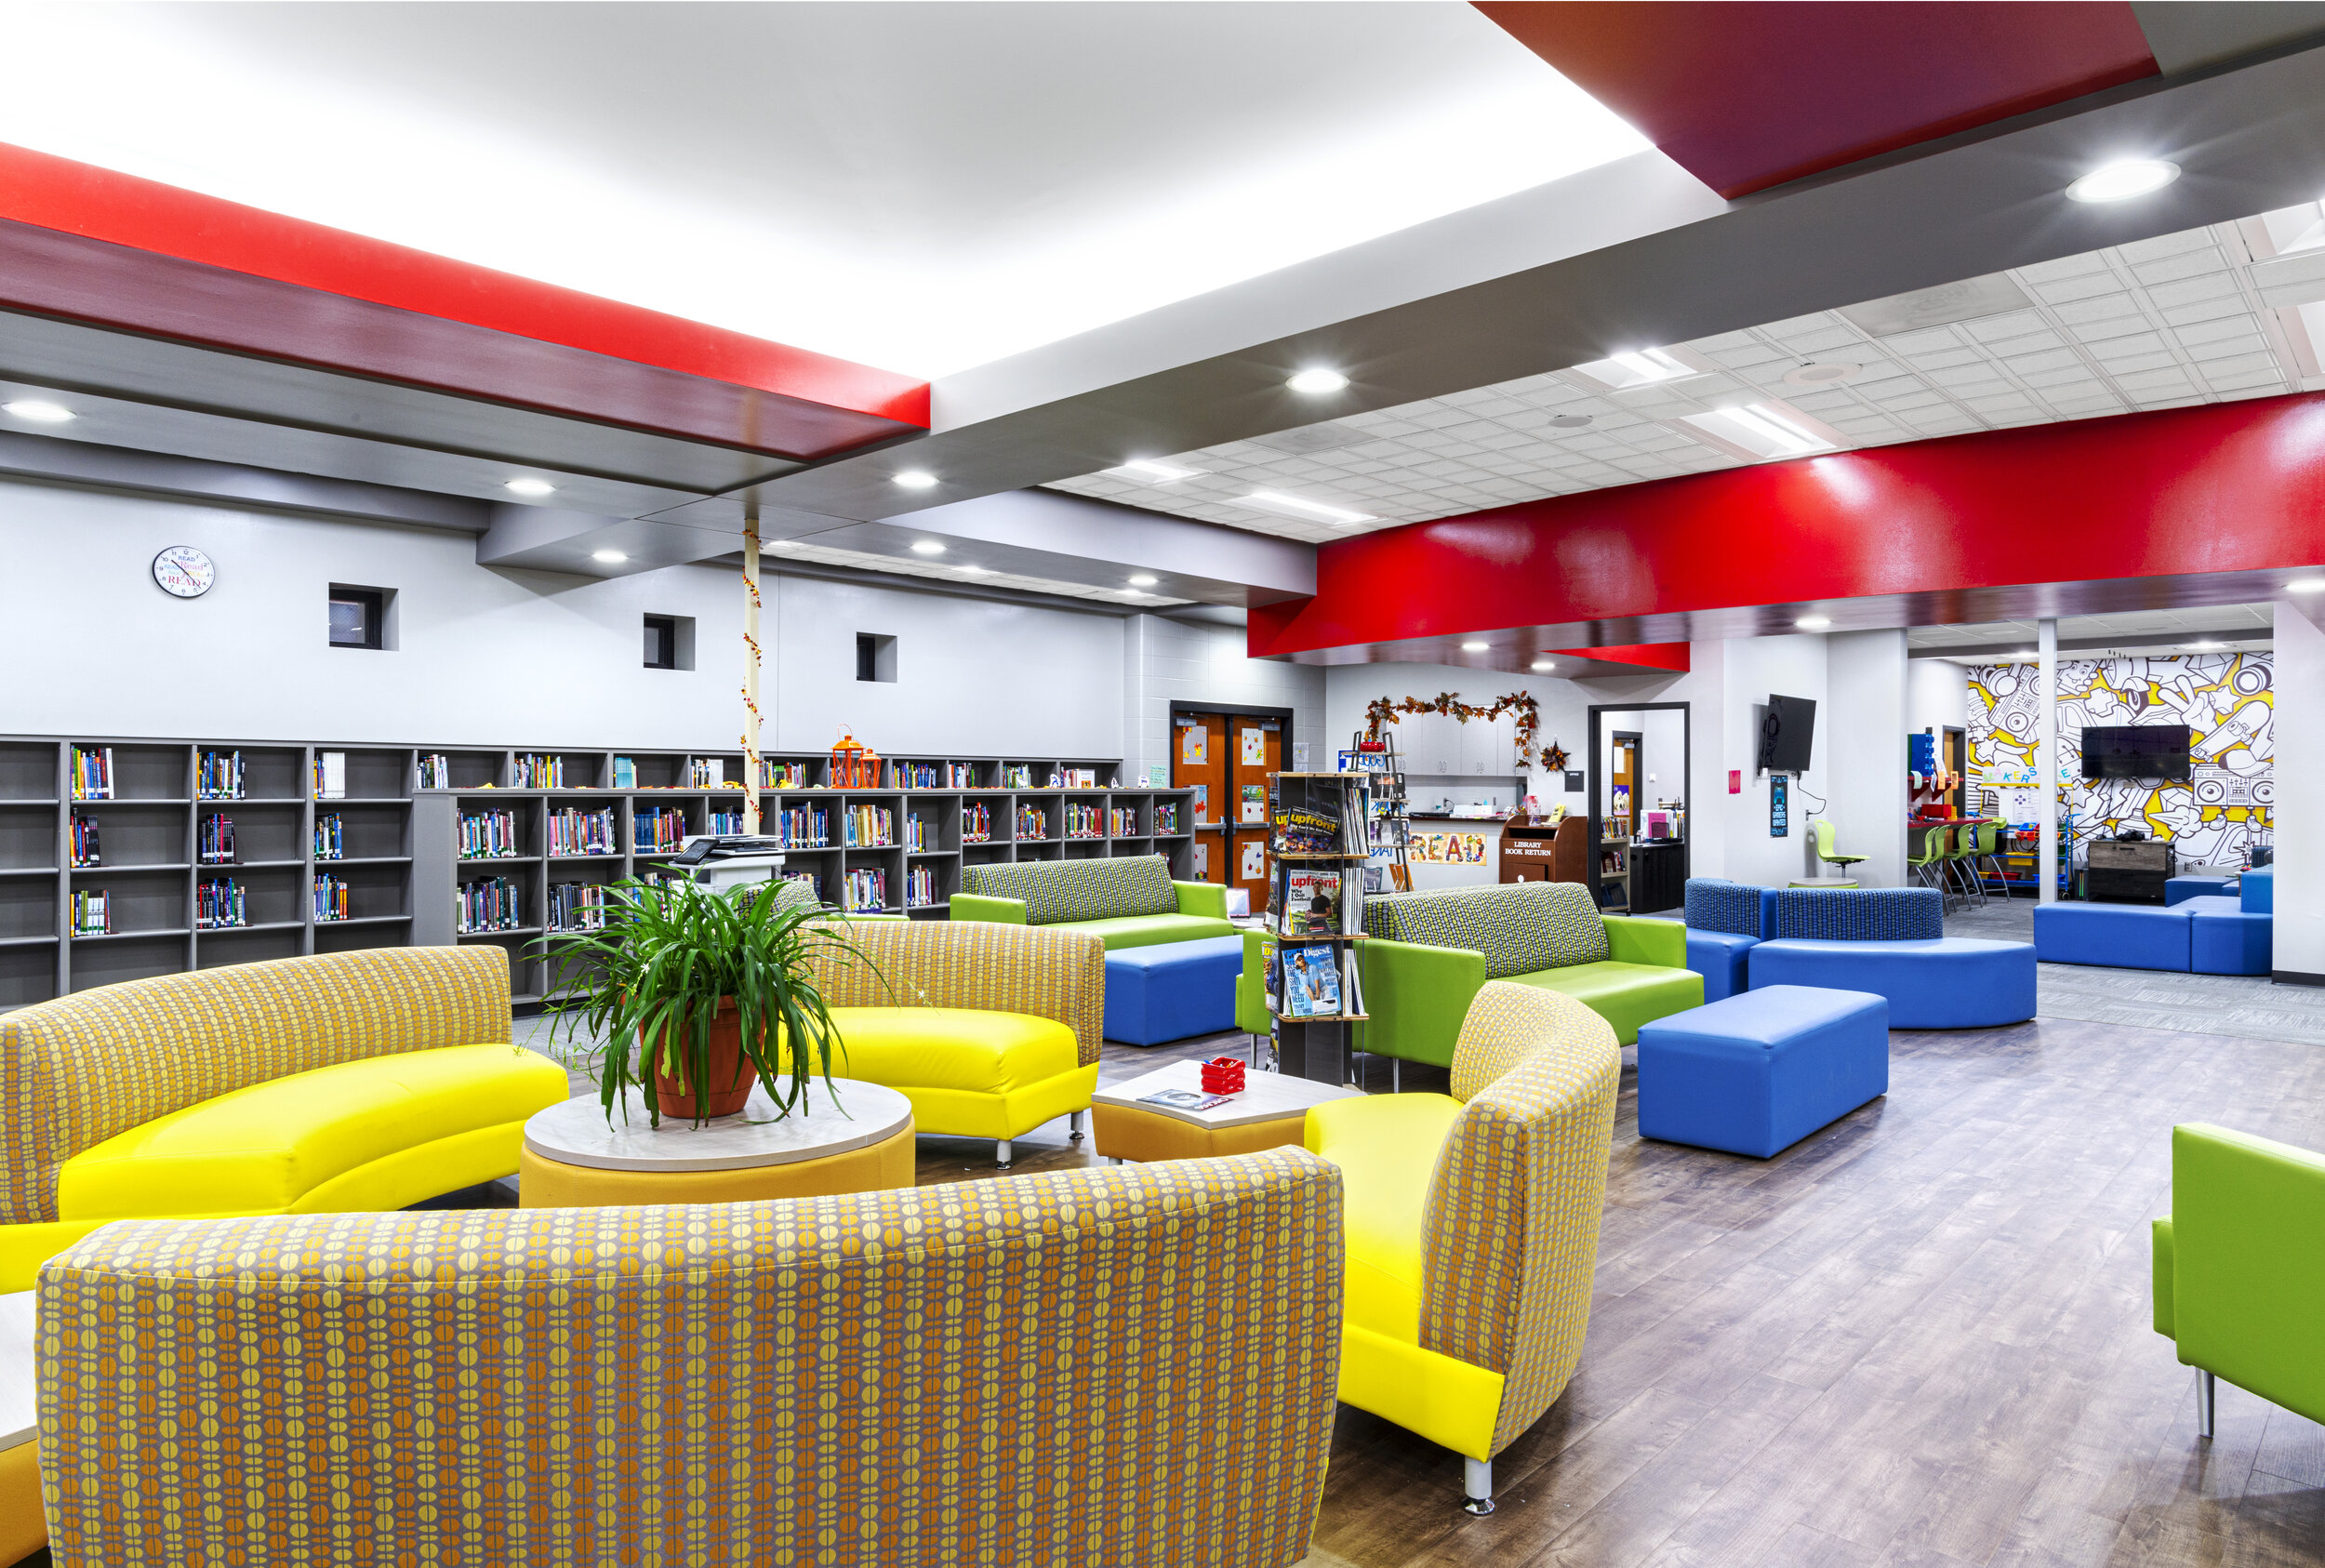 Photo of a colorful library of a school, taken by interior photographer Al Ensley.